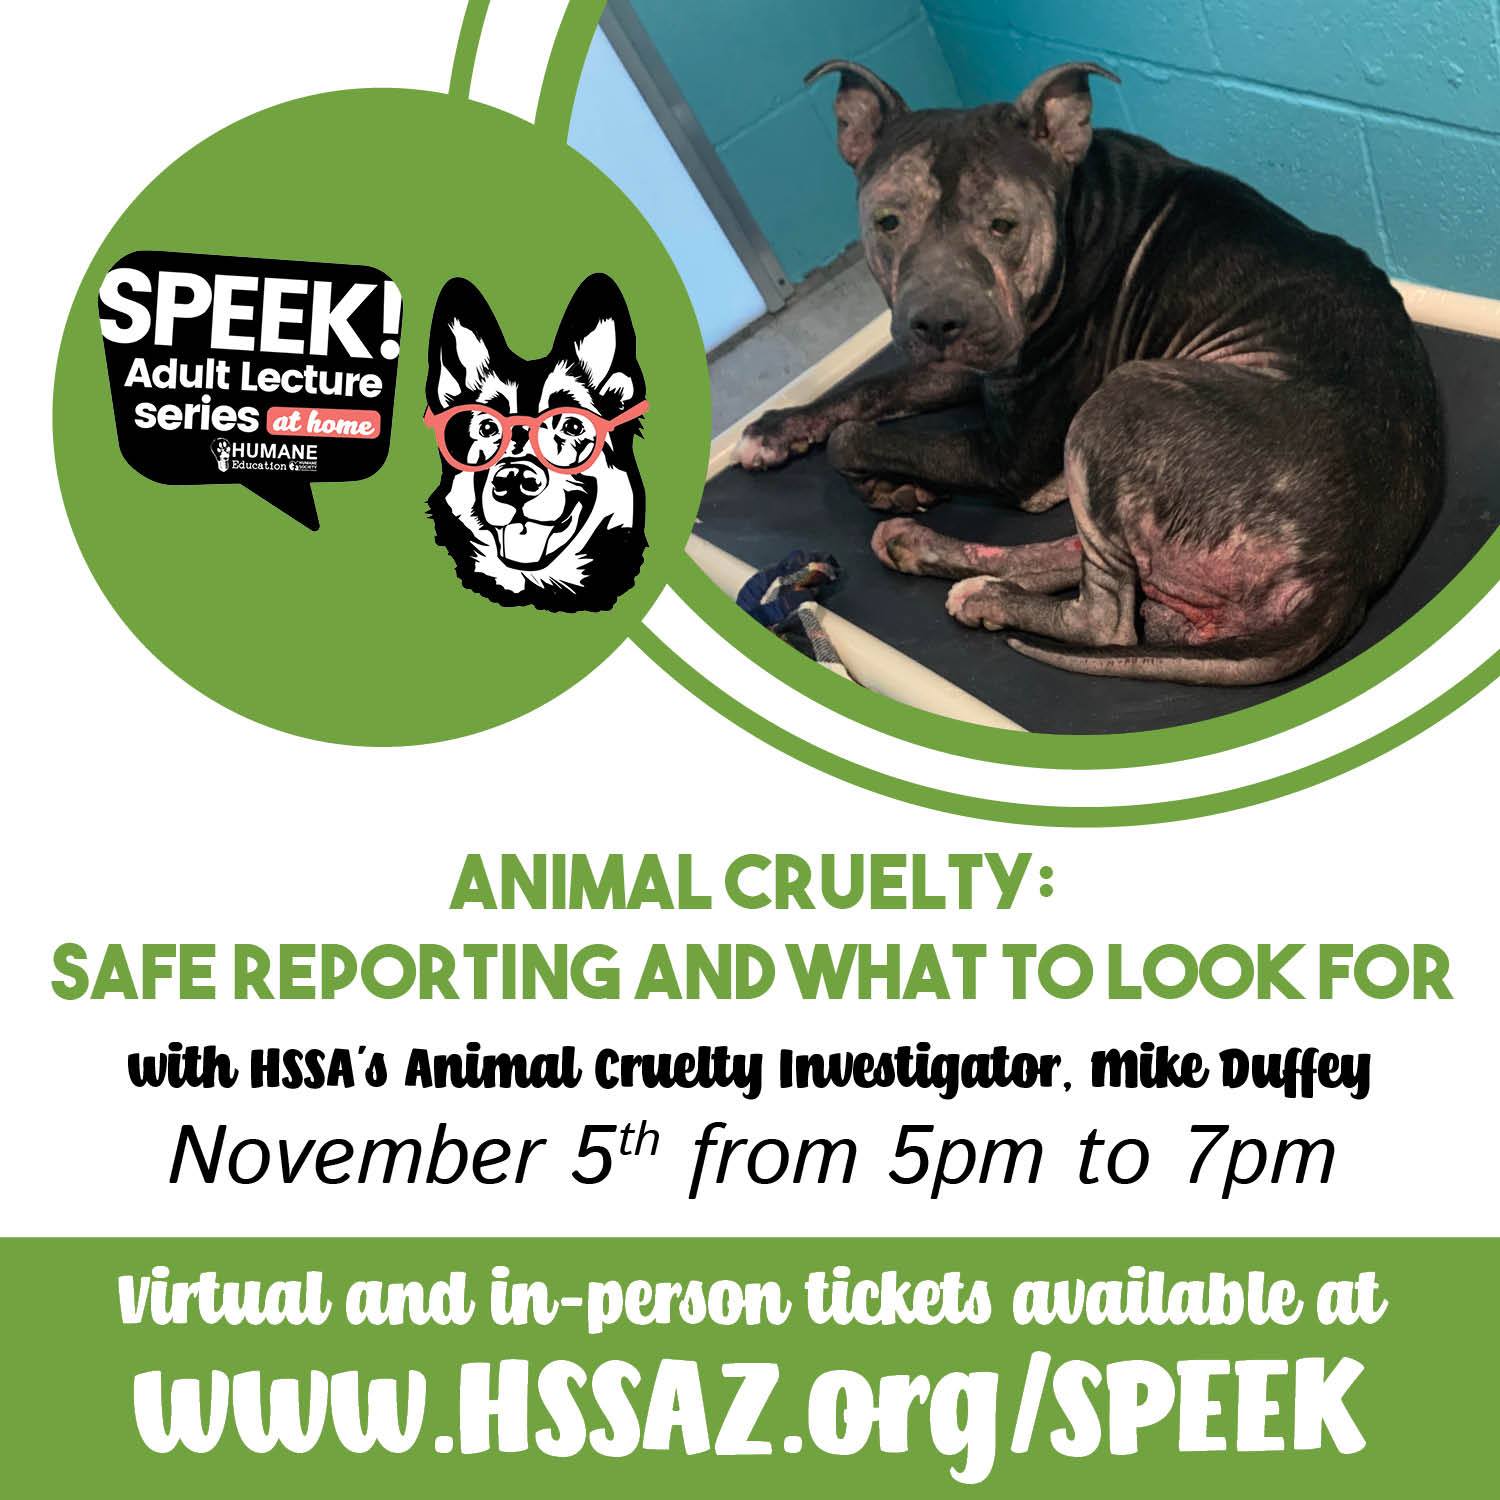 SPEEK: Animal Cruelty, Safe Reporting and What to Look For